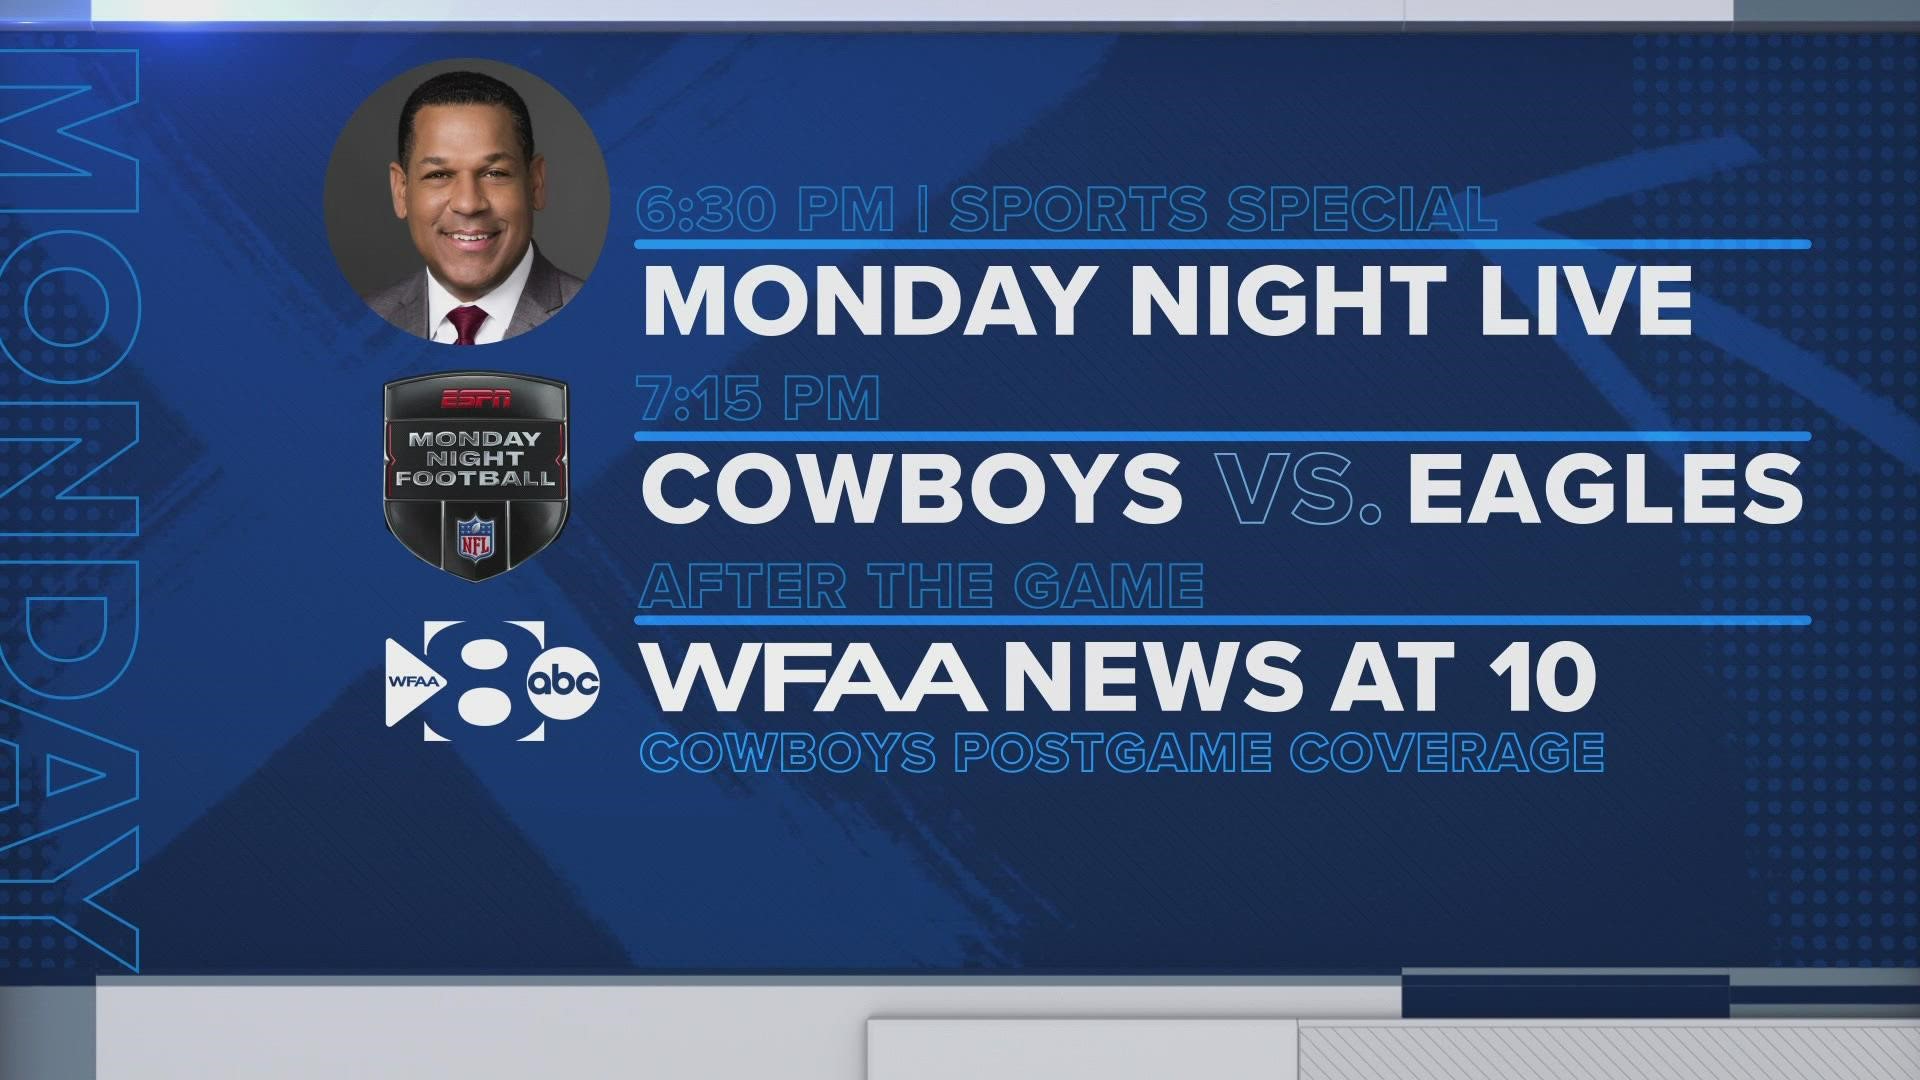 Get ready for Monday Night Football on WFAA as the Dallas Cowboys take on their rivals, the Philadelphia Eagles.